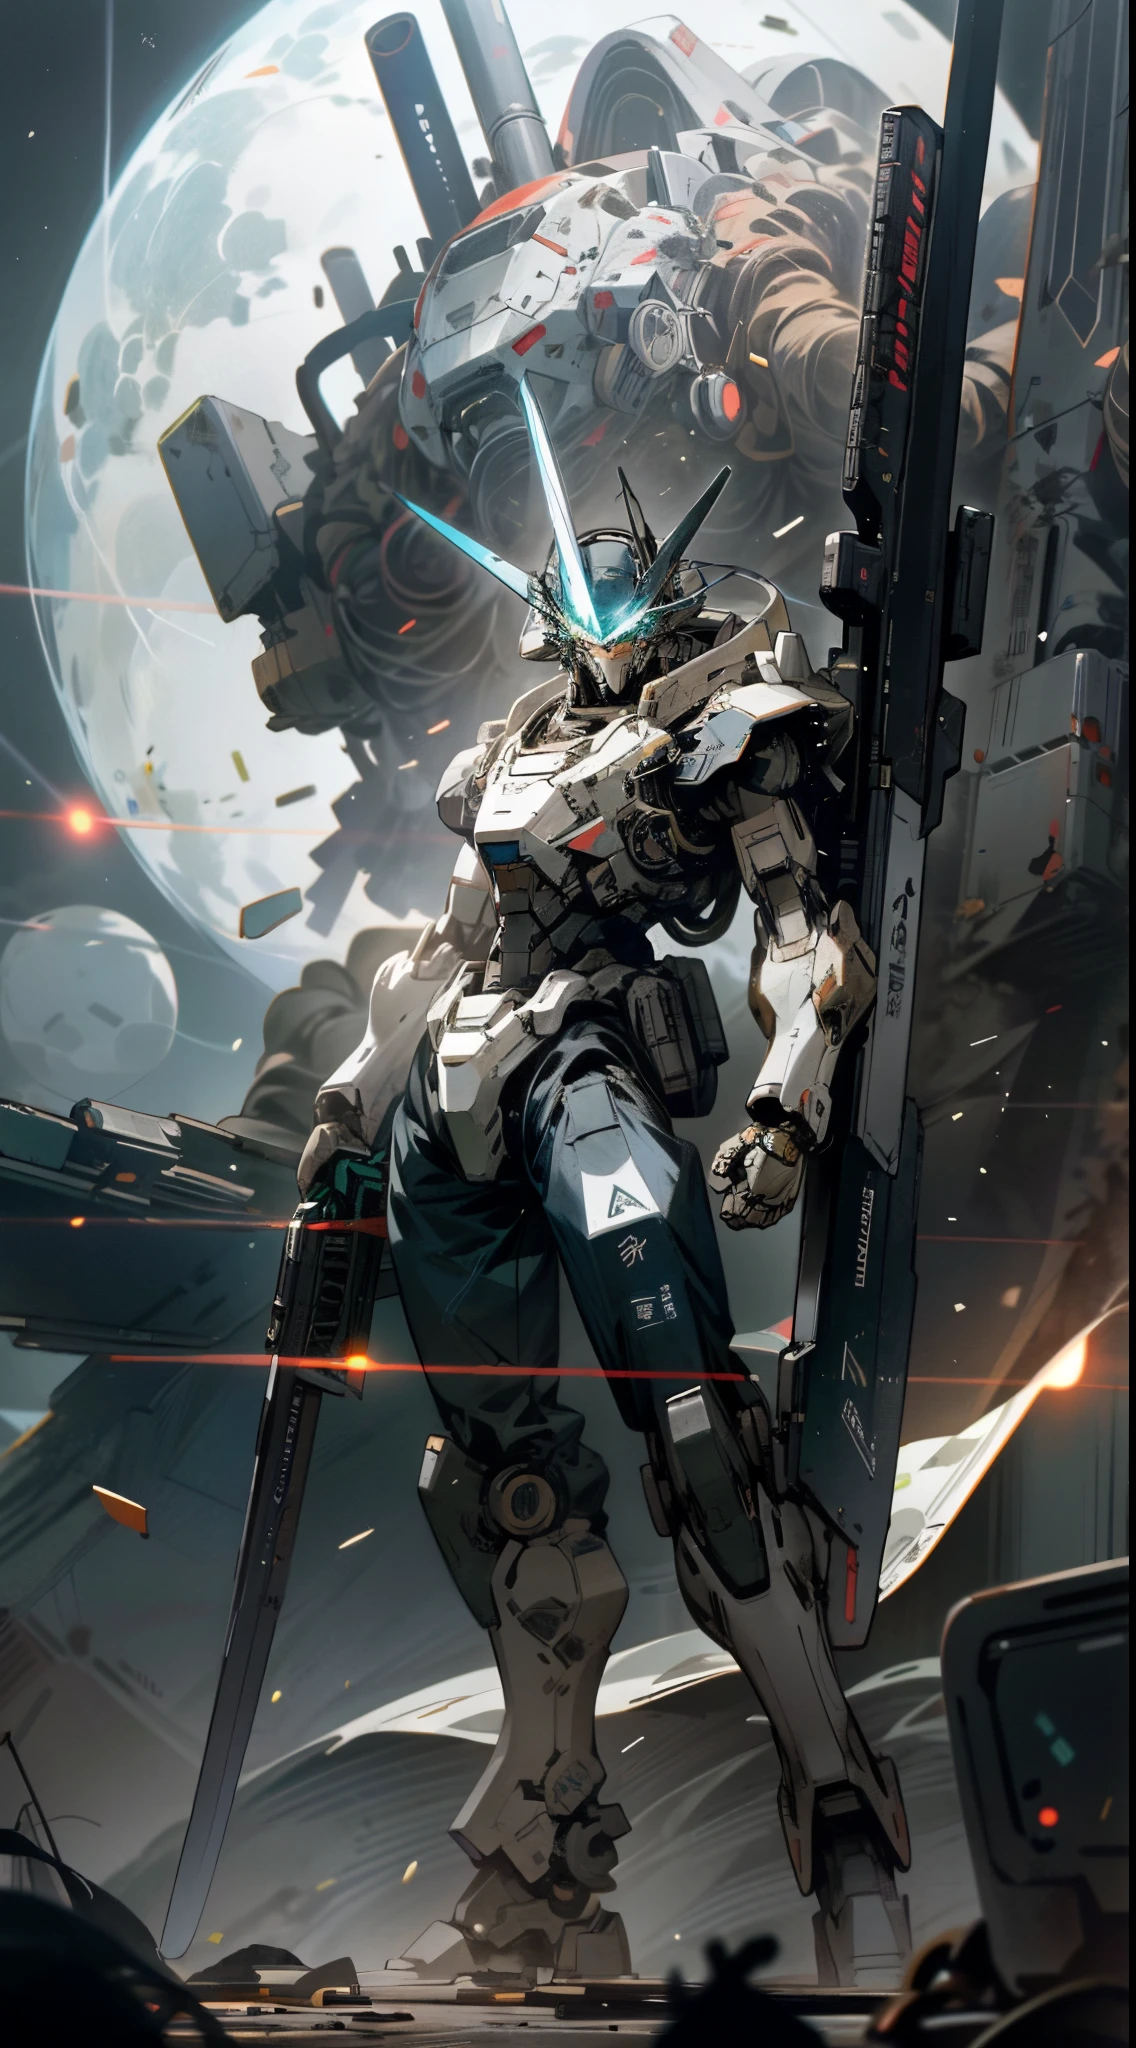 space, holding_weapon, no_humans, glowing, giant robot, flying, rifle at viewer,point at viewer,, destroyed space colony, ruins, glowing_eyes, mecha, science fiction, satellite orbit, reality, mech, wearing a shield on its back,